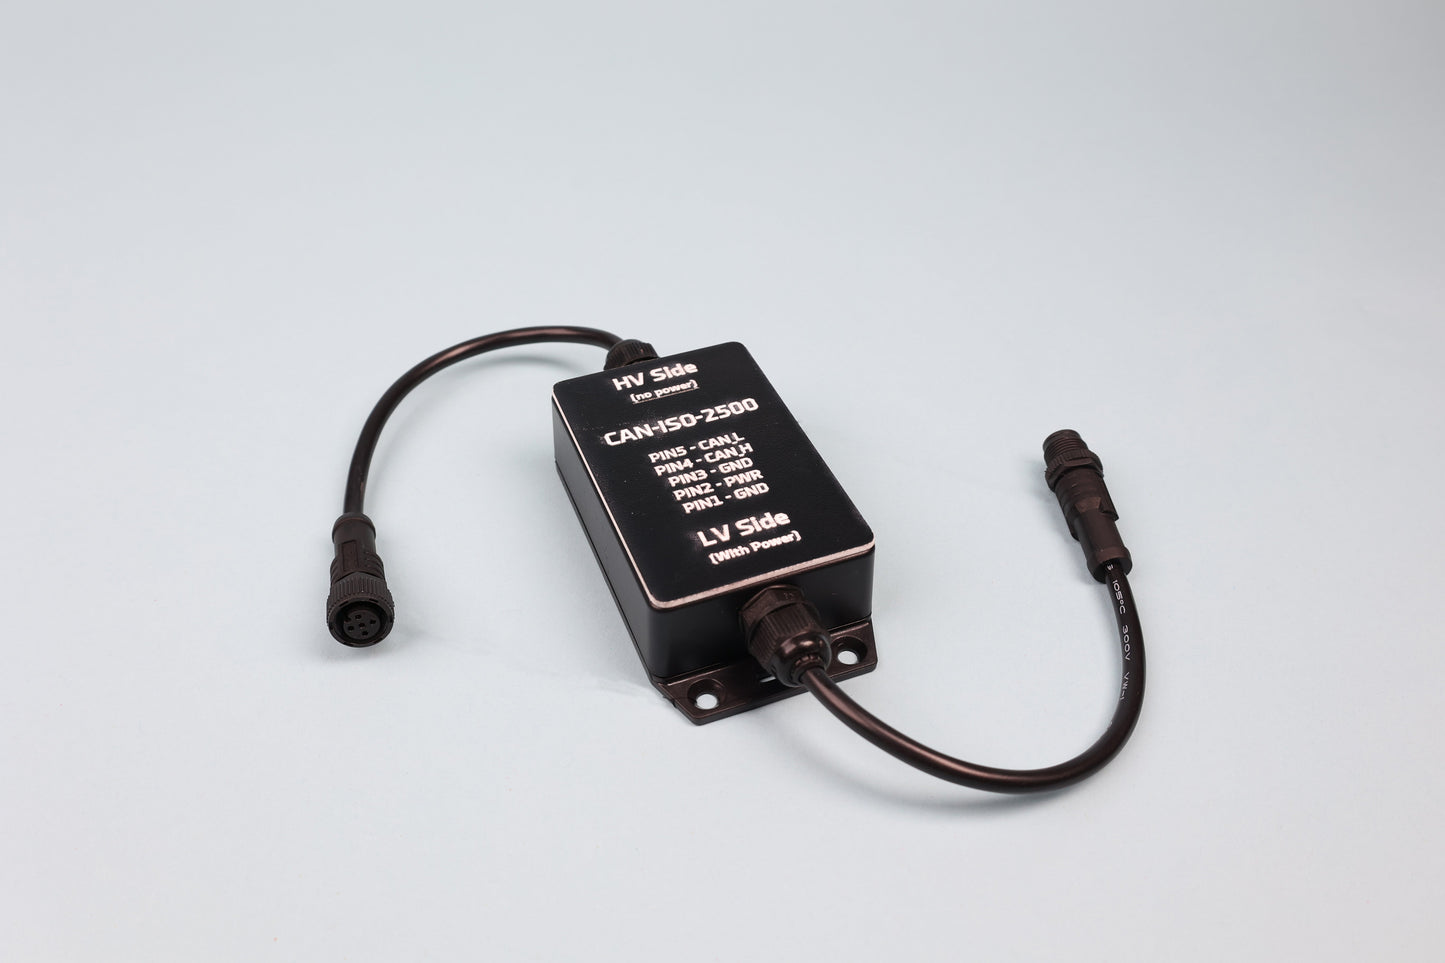 CAN Isolator with M12 pigtail connectors. Galvanic isolation CAN Bus device.